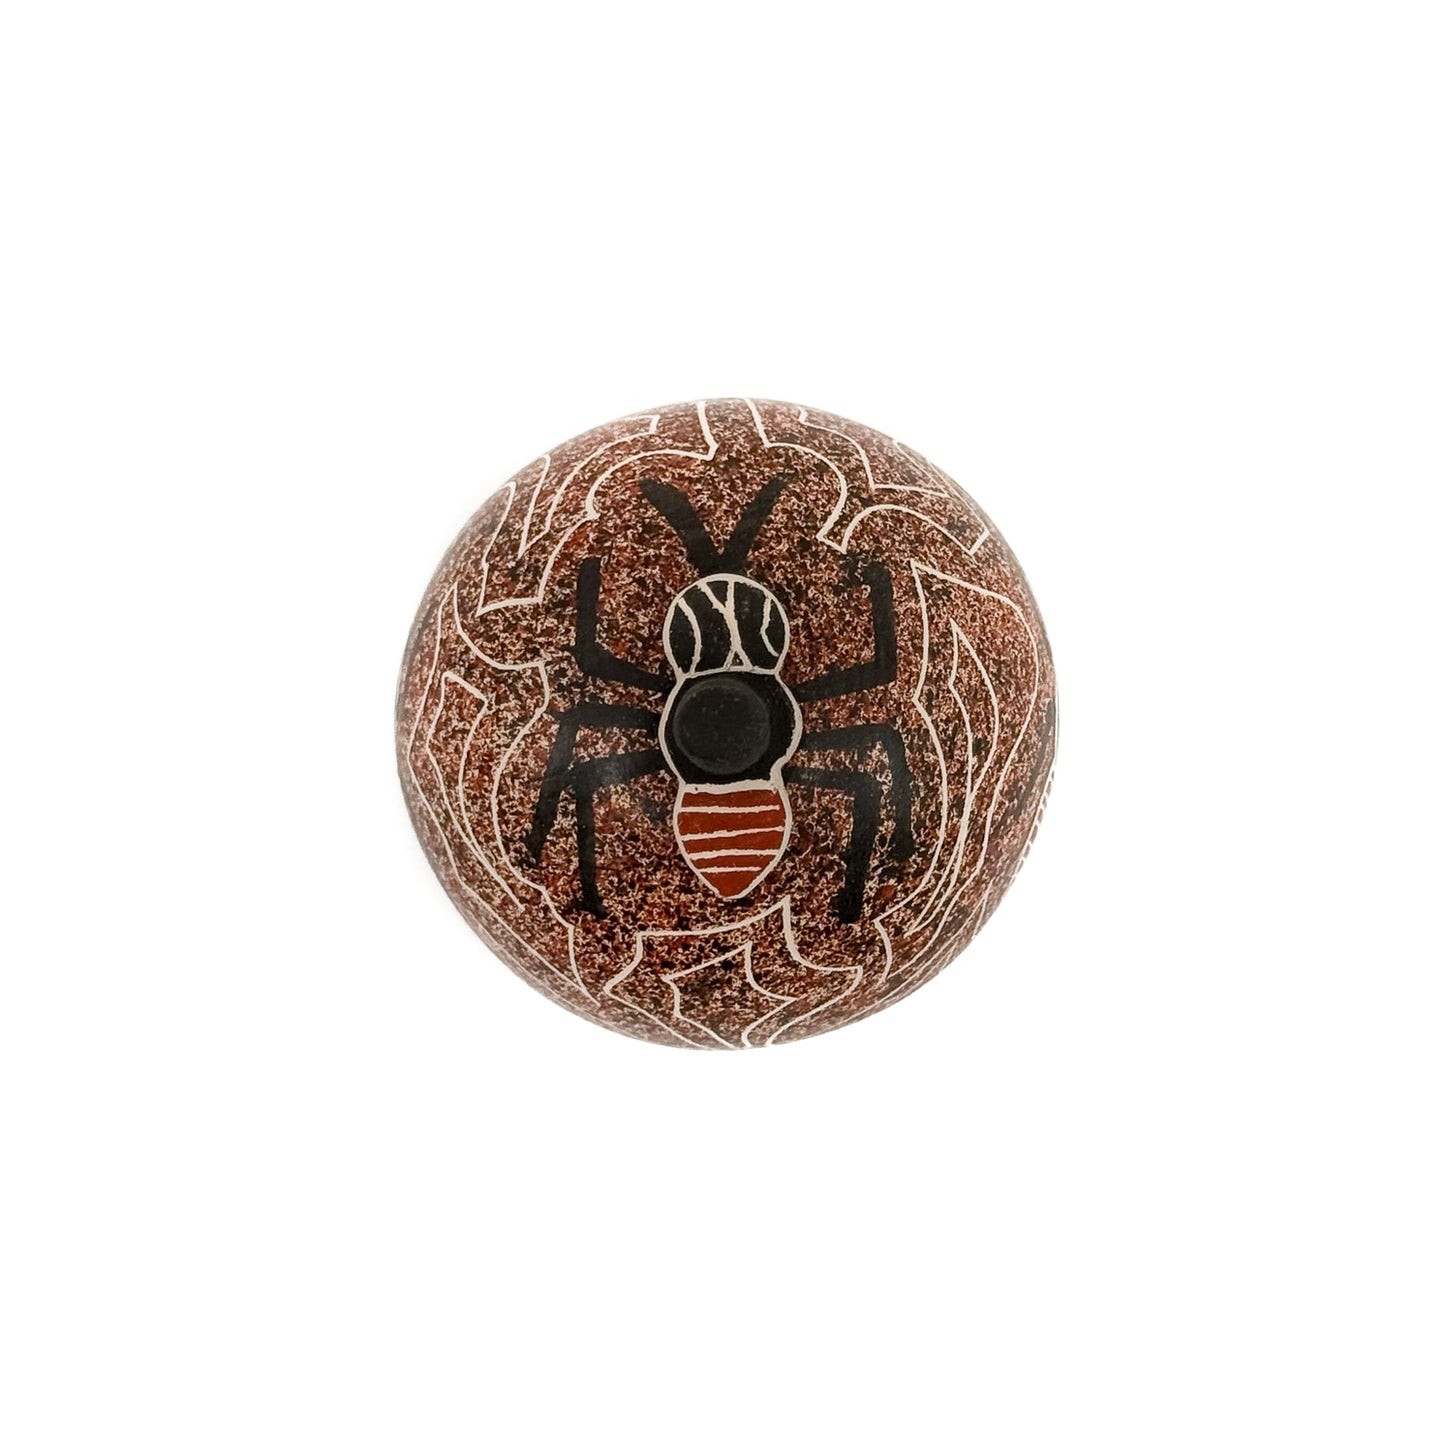 Small Seed Pot with Ant Shaped Stopper